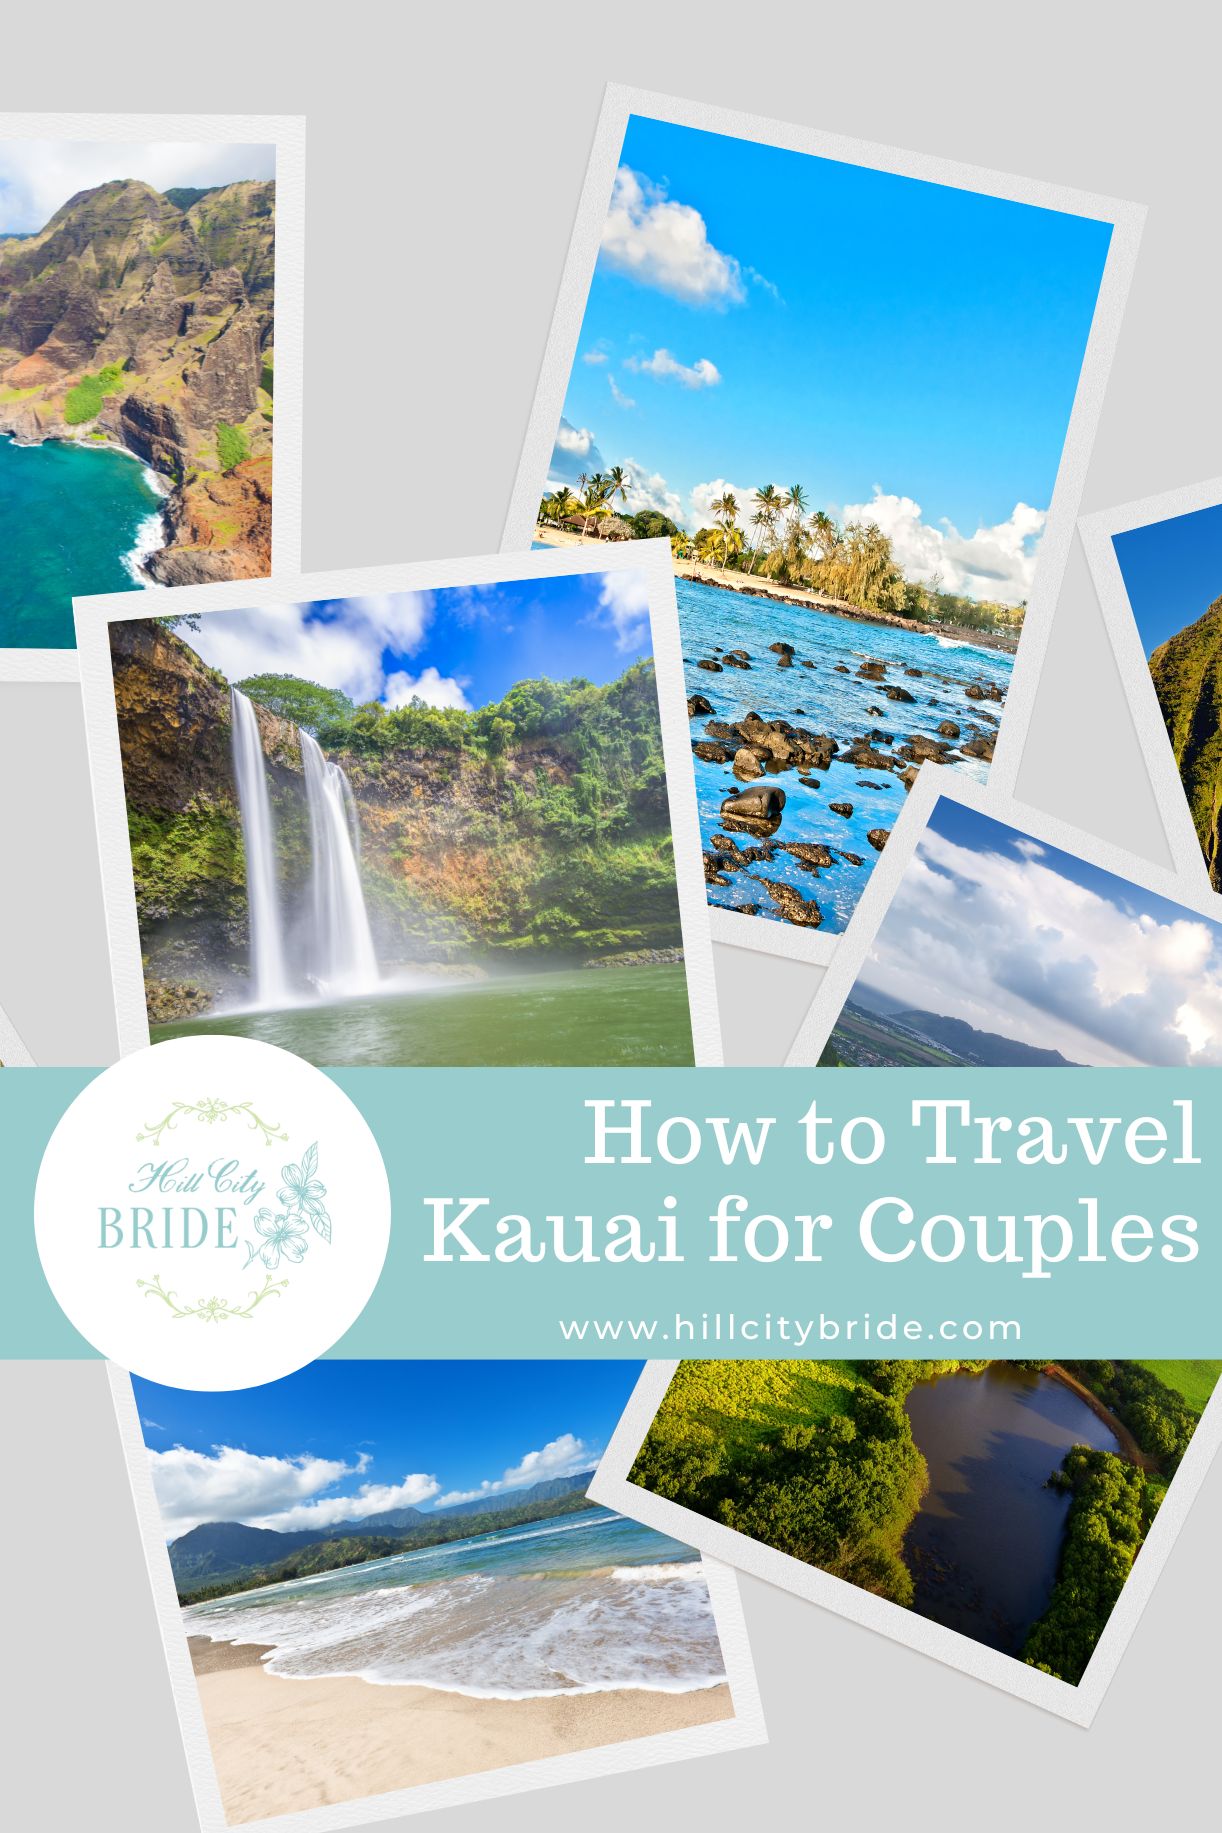 How to Spend 5 Days in Kauai